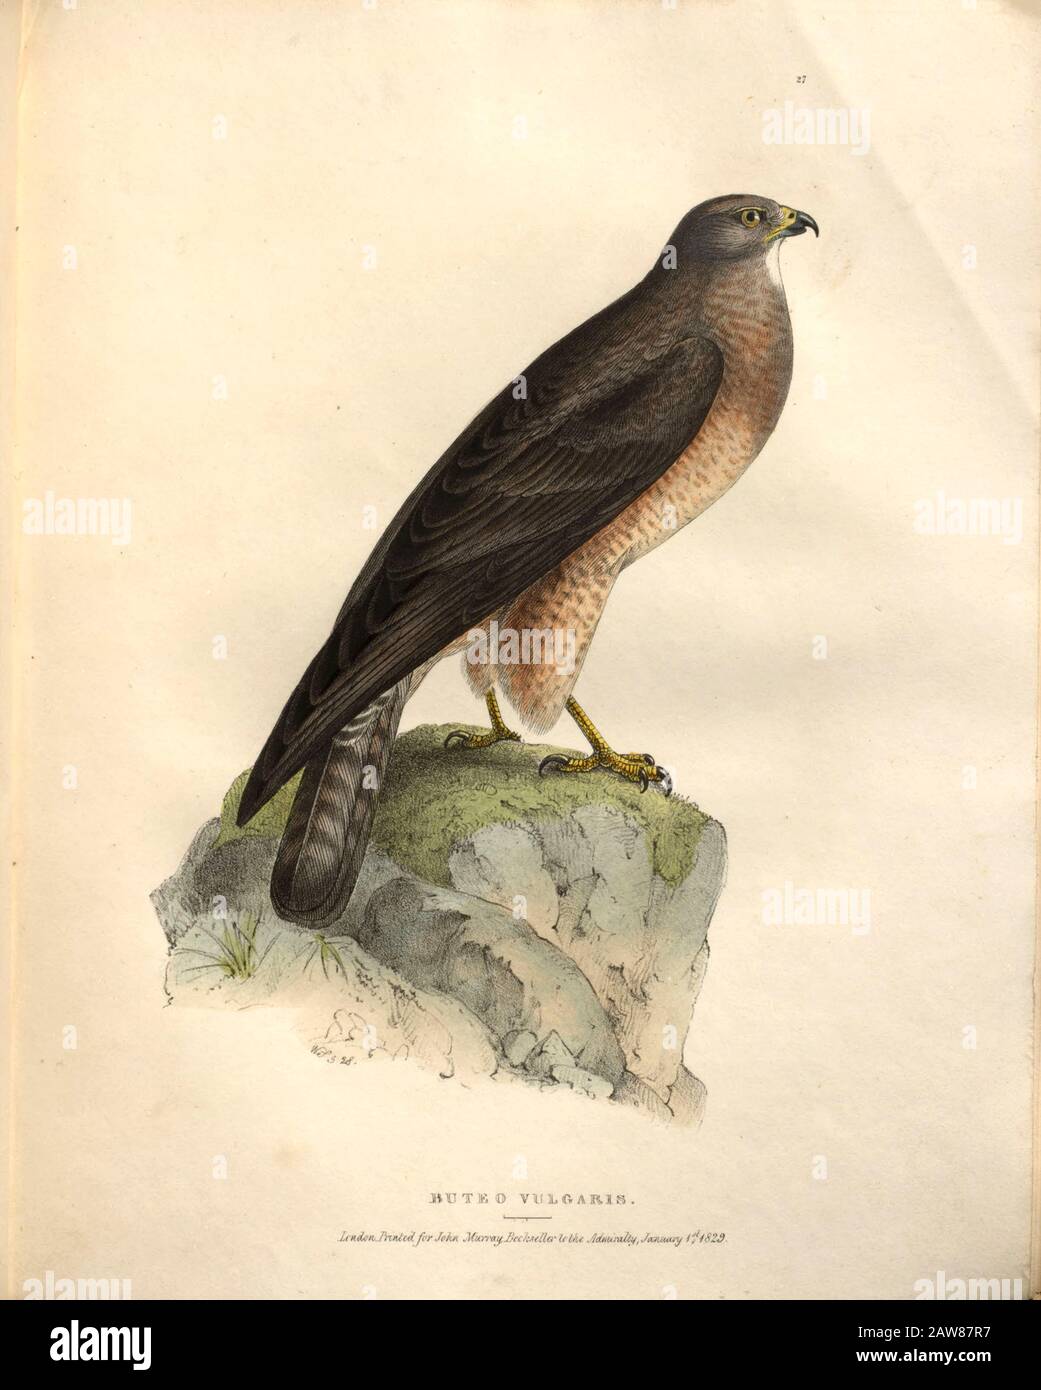 common buzzard (Buteo buteo syn Buteo vulgaris) color plate of North American birds from Fauna boreali-americana; or, The zoology of the northern parts of British America, containing descriptions of the objects of natural history collected on the late northern land expeditions under command of Capt. Sir John Franklin by Richardson, John, Sir, 1787-1865 Published 1829 Stock Photo